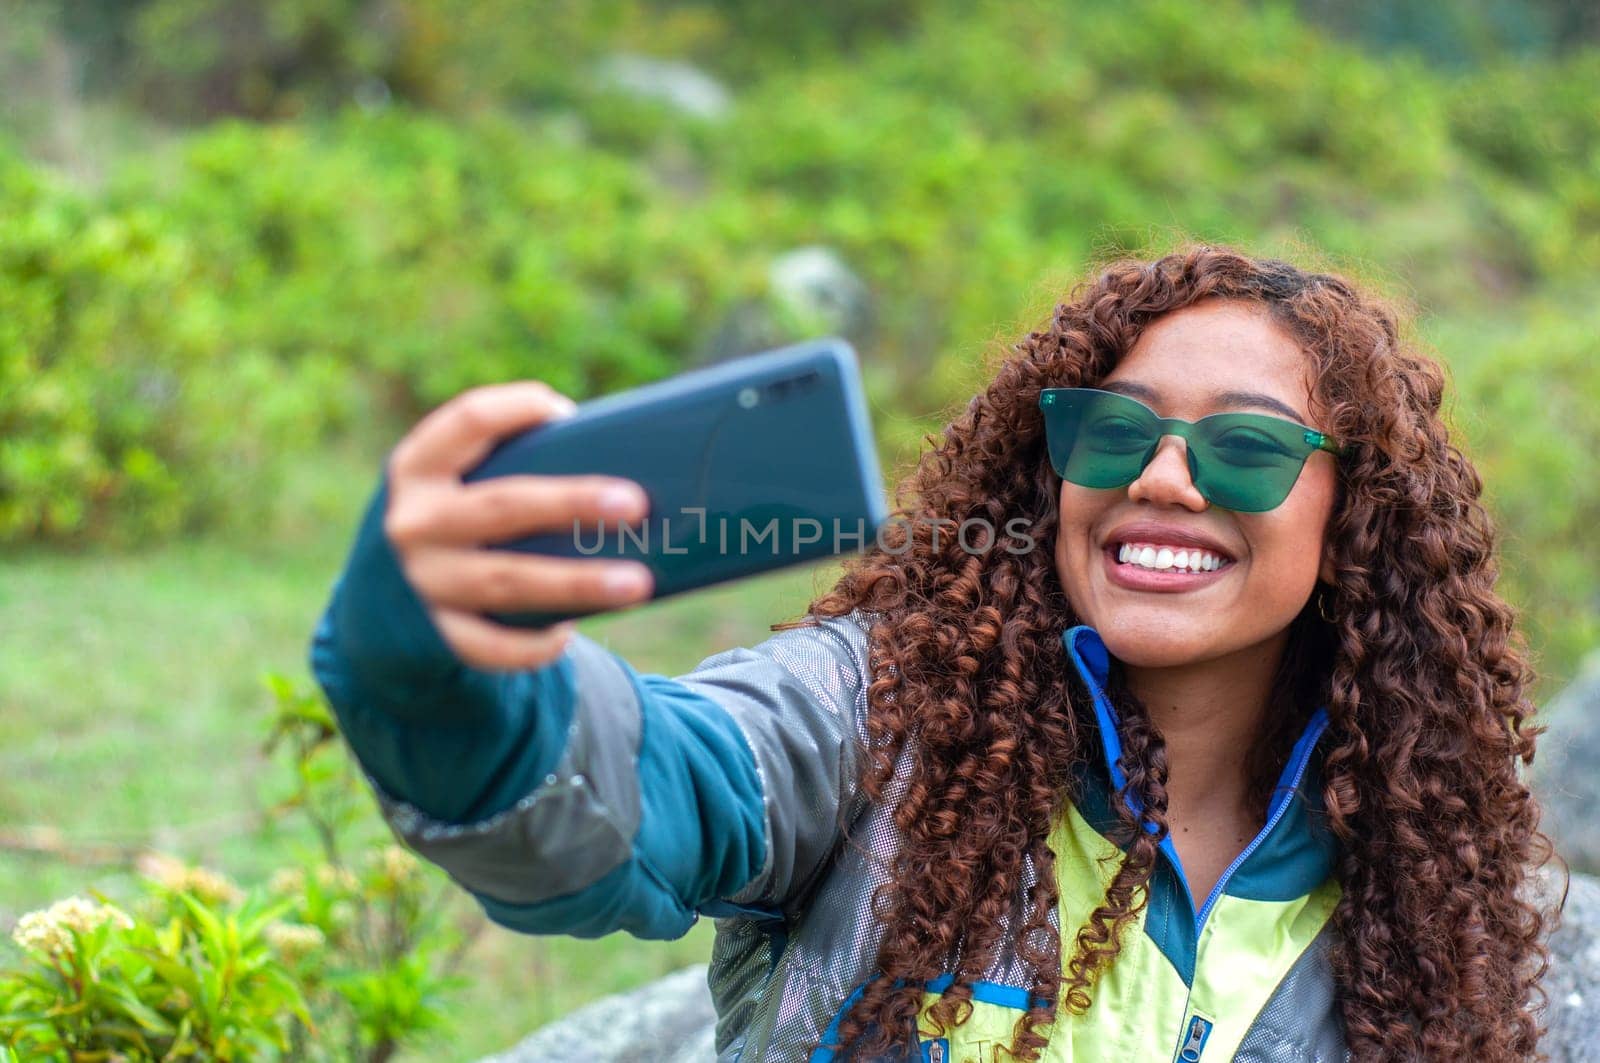 pretty latina and tourism vlogger with green glasses and curly hair showing her followers the mountain place where she is. High quality photo